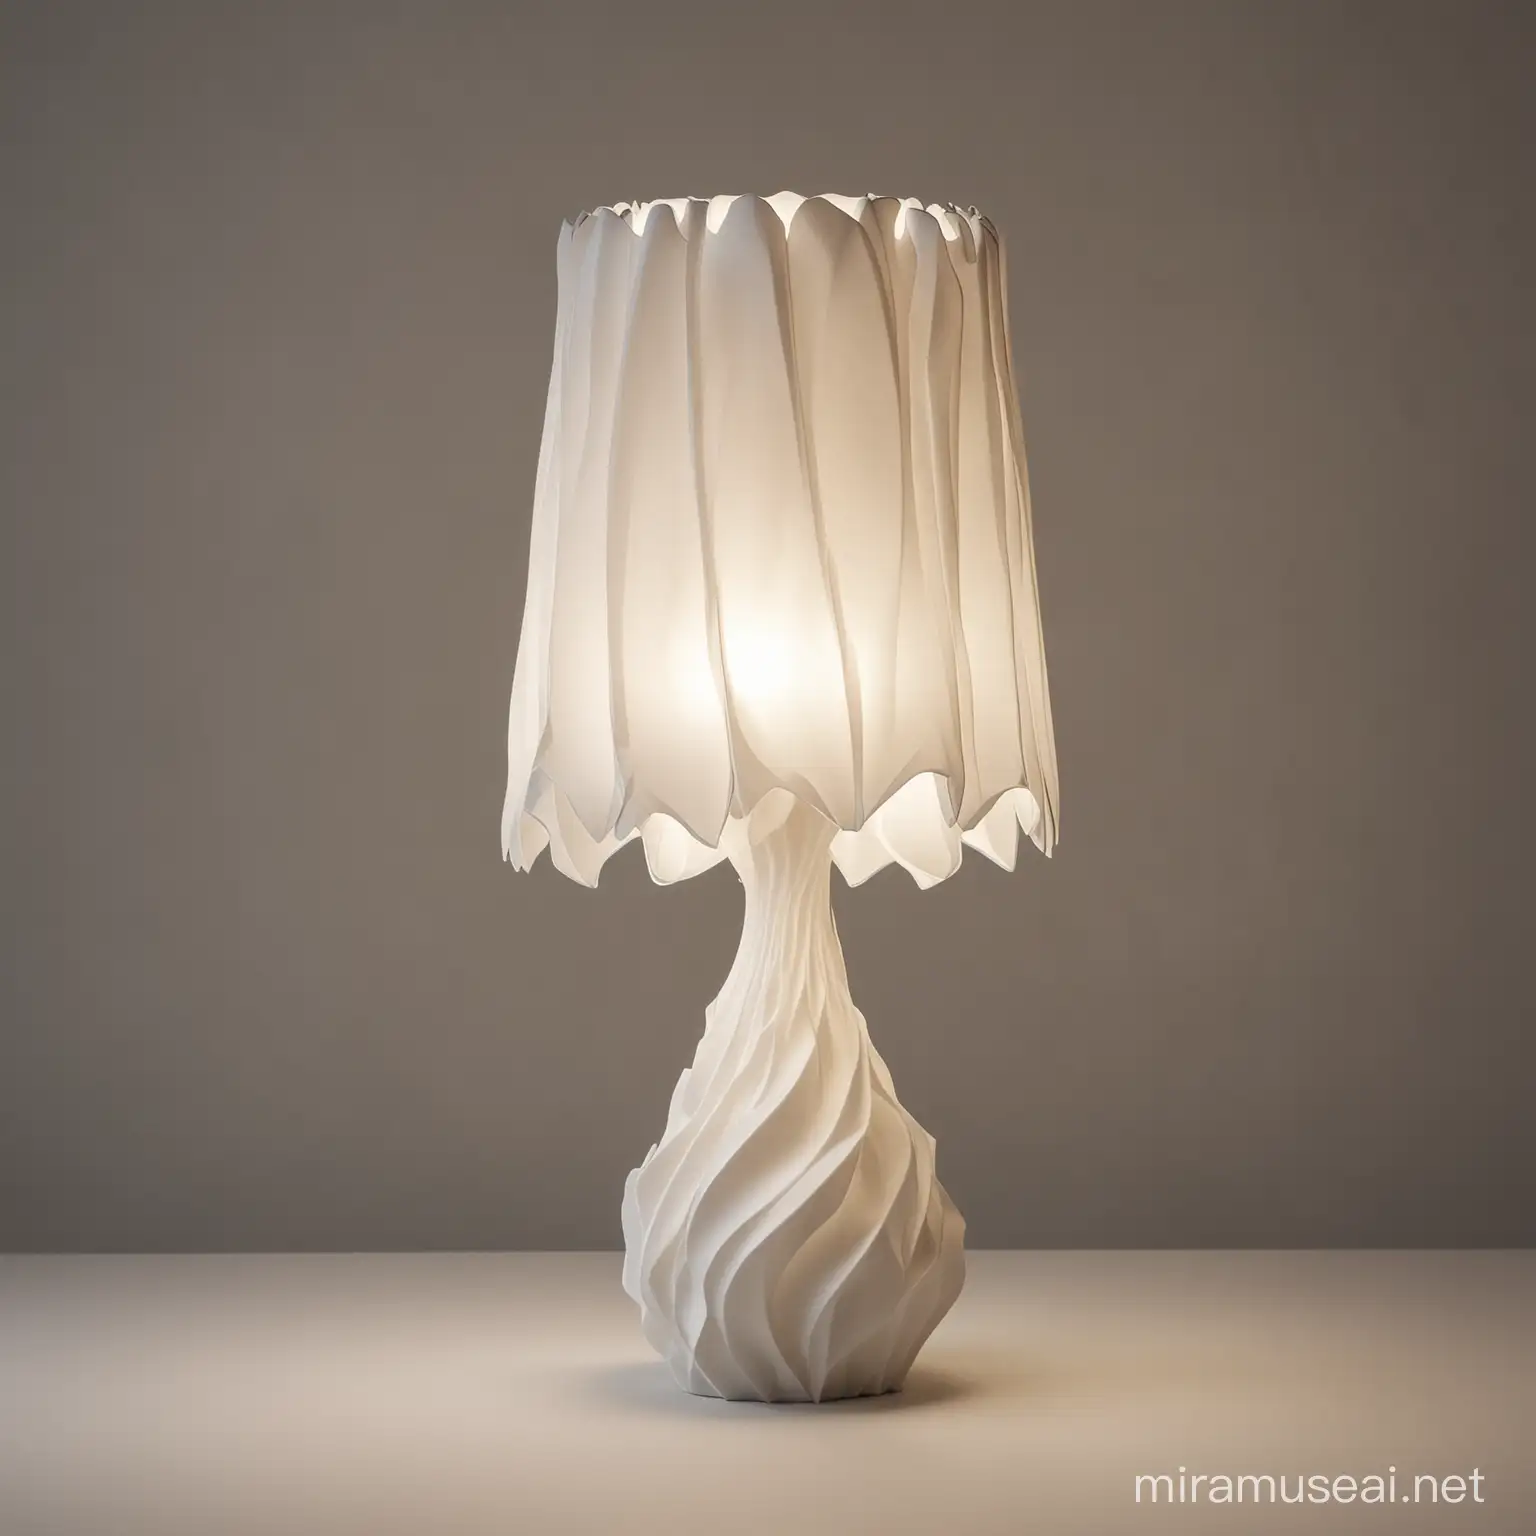 A 3D printed free form, issey miyake-style lamp, cinematic looking with camera depth of field.